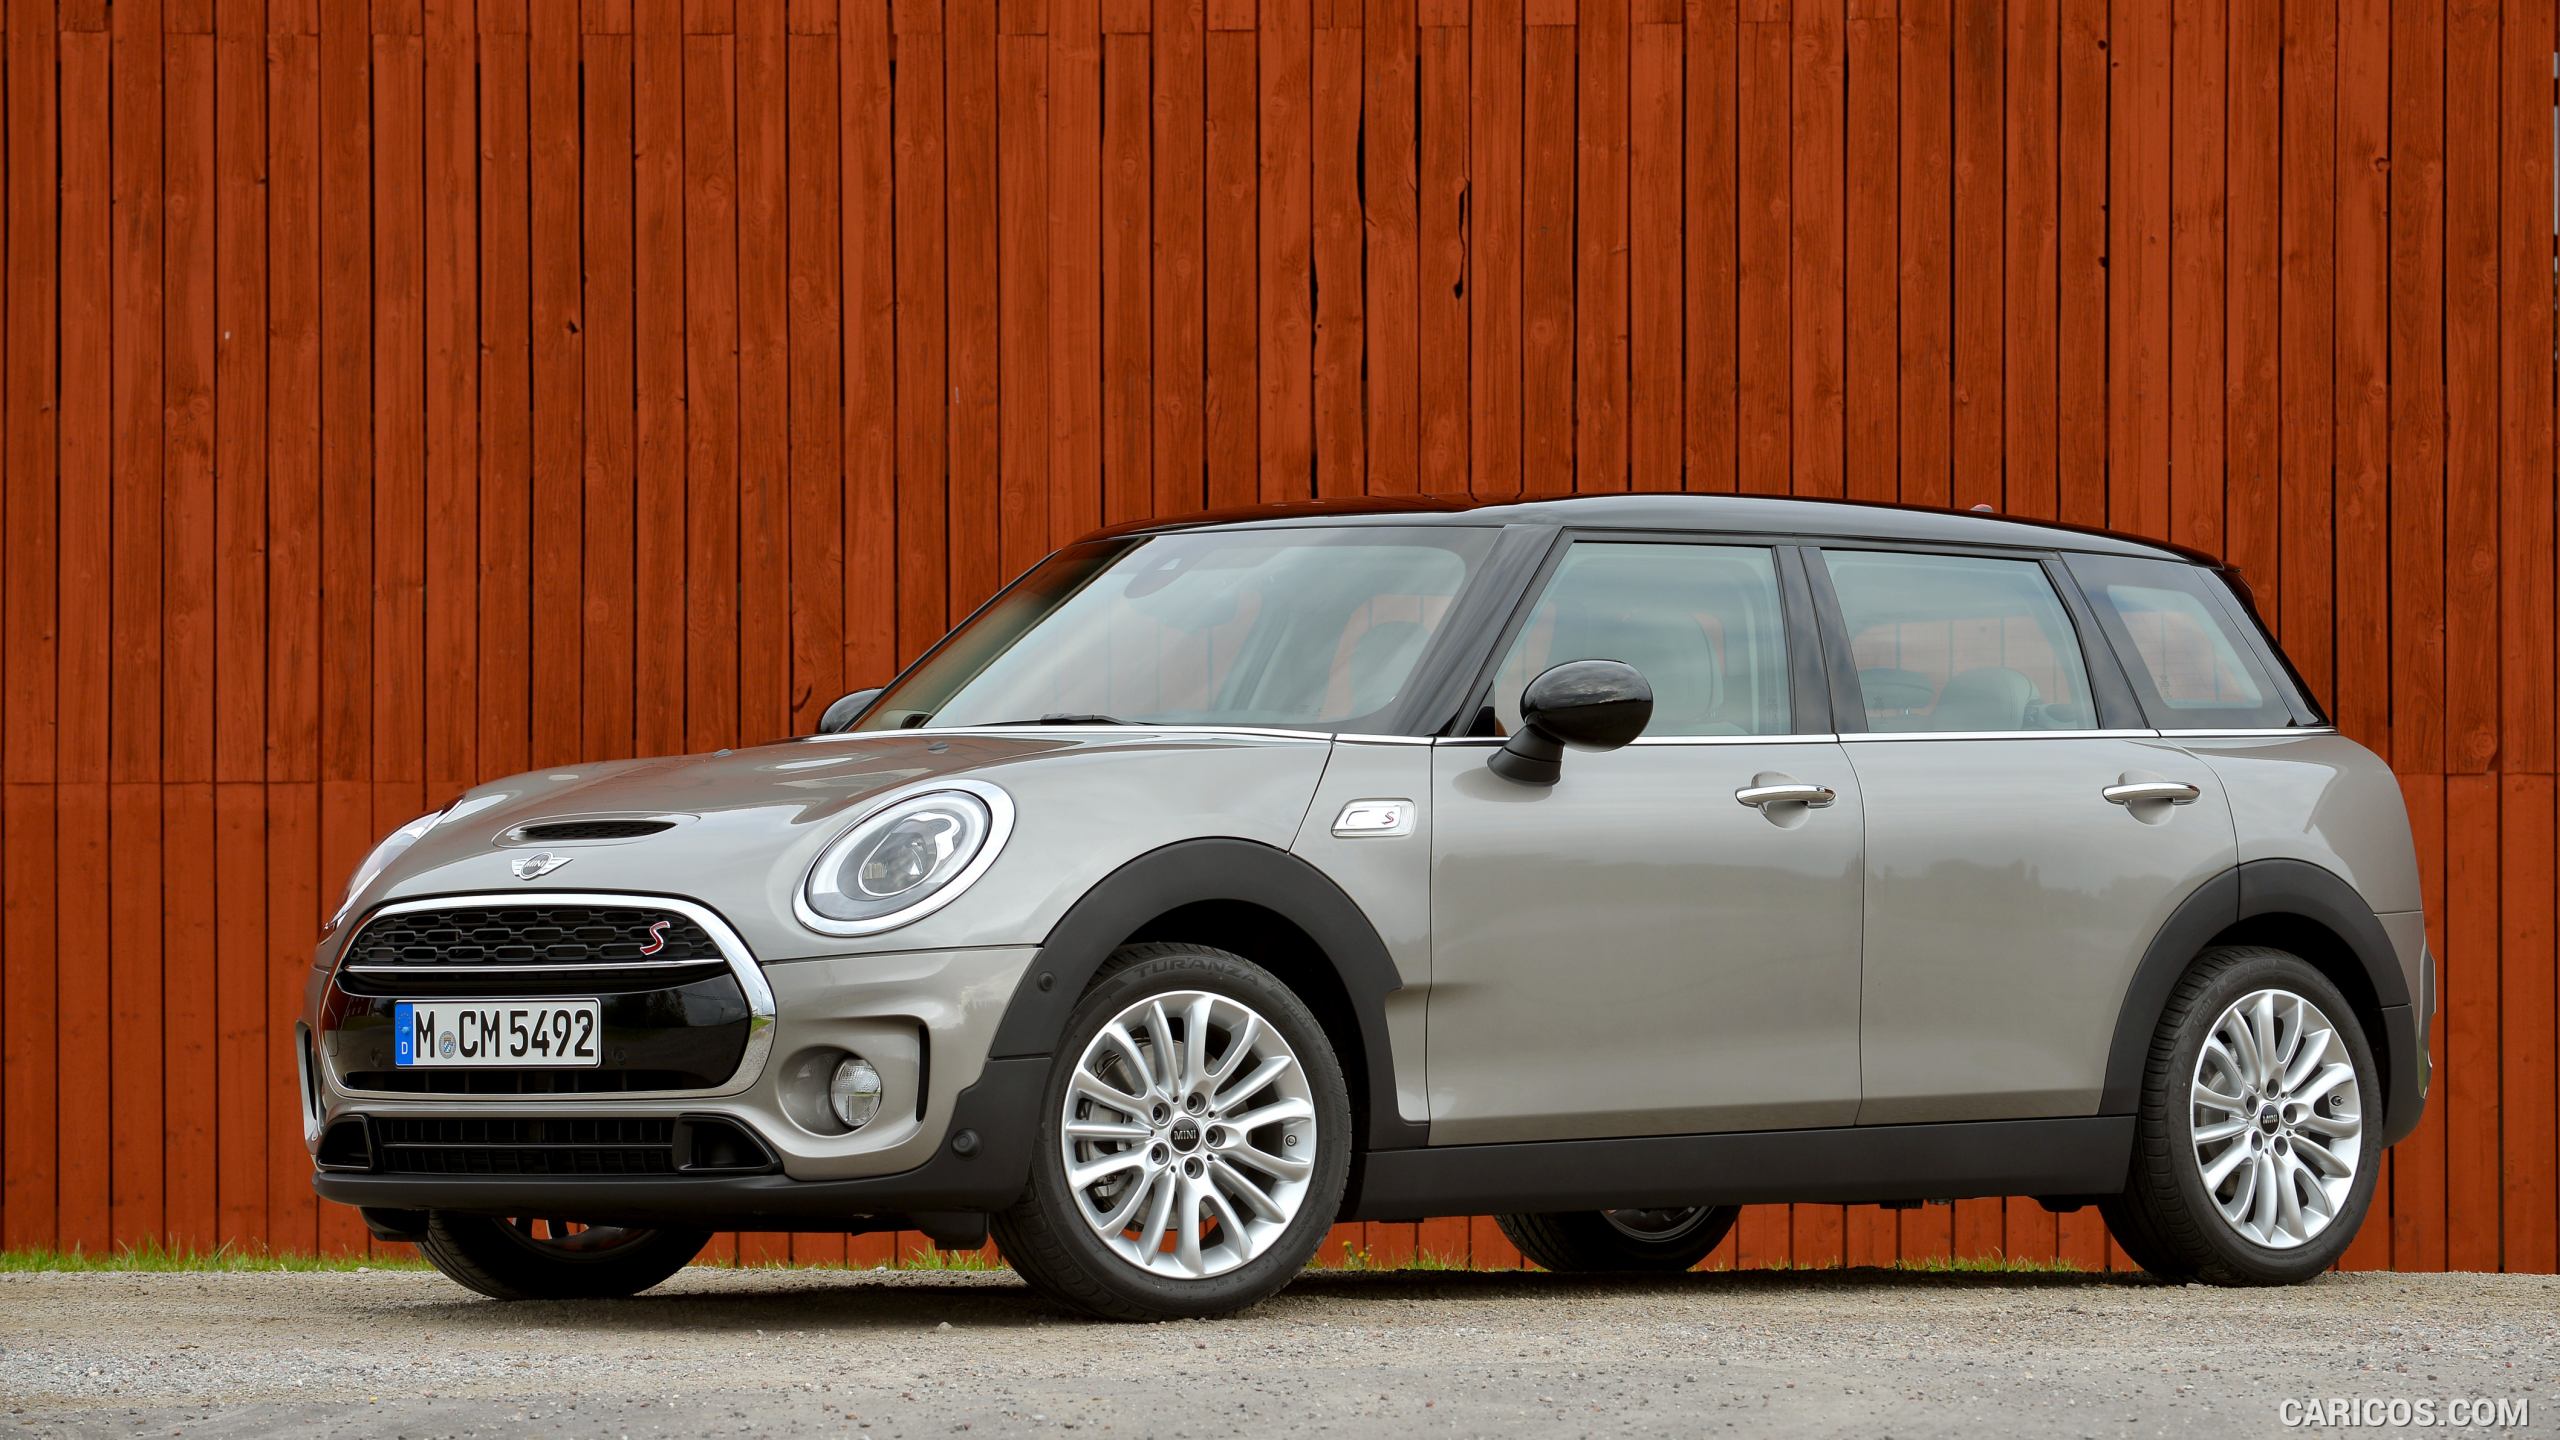 2016 MINI Cooper S Clubman in Metallic Melting Silver - Front, #188 of 380